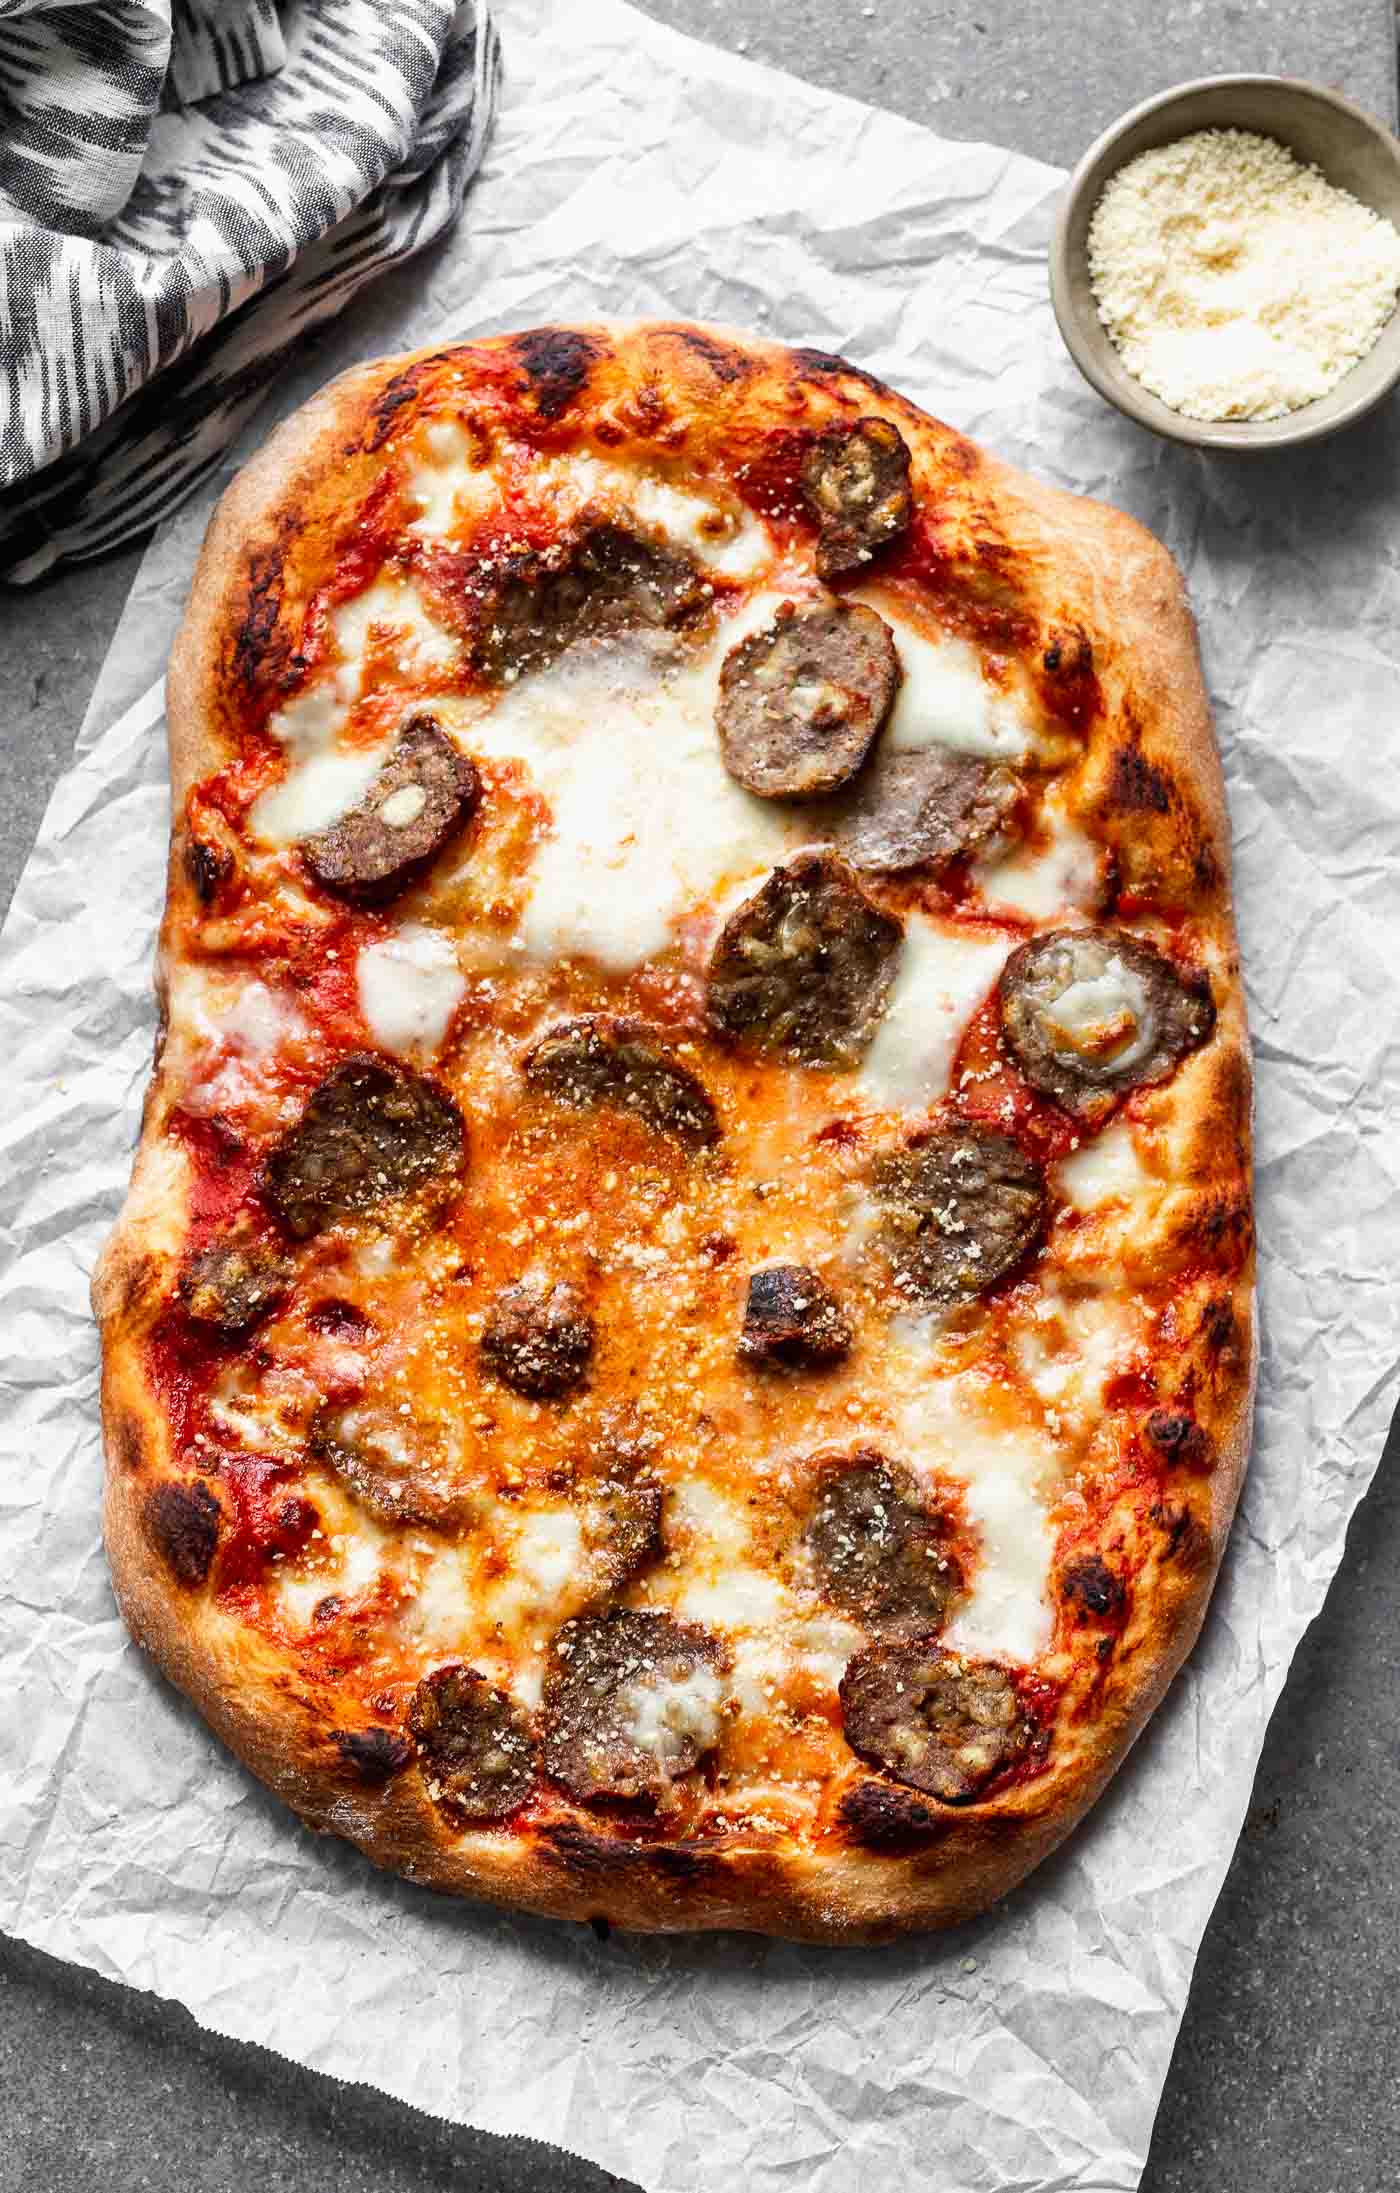 Tender, flavor-packed meatballs are sliced and layered with fresh mozzarella, parmesan cheese and a spaghetti and a meatball-inspired marinara sauce, in the&nbsp;<strong>Best Meatball Pizza Recipe.</strong> Topped with a fresh dusting of parmesan cheese, this simple pizza will become a new favorite! Perfect for leftover meatballs!